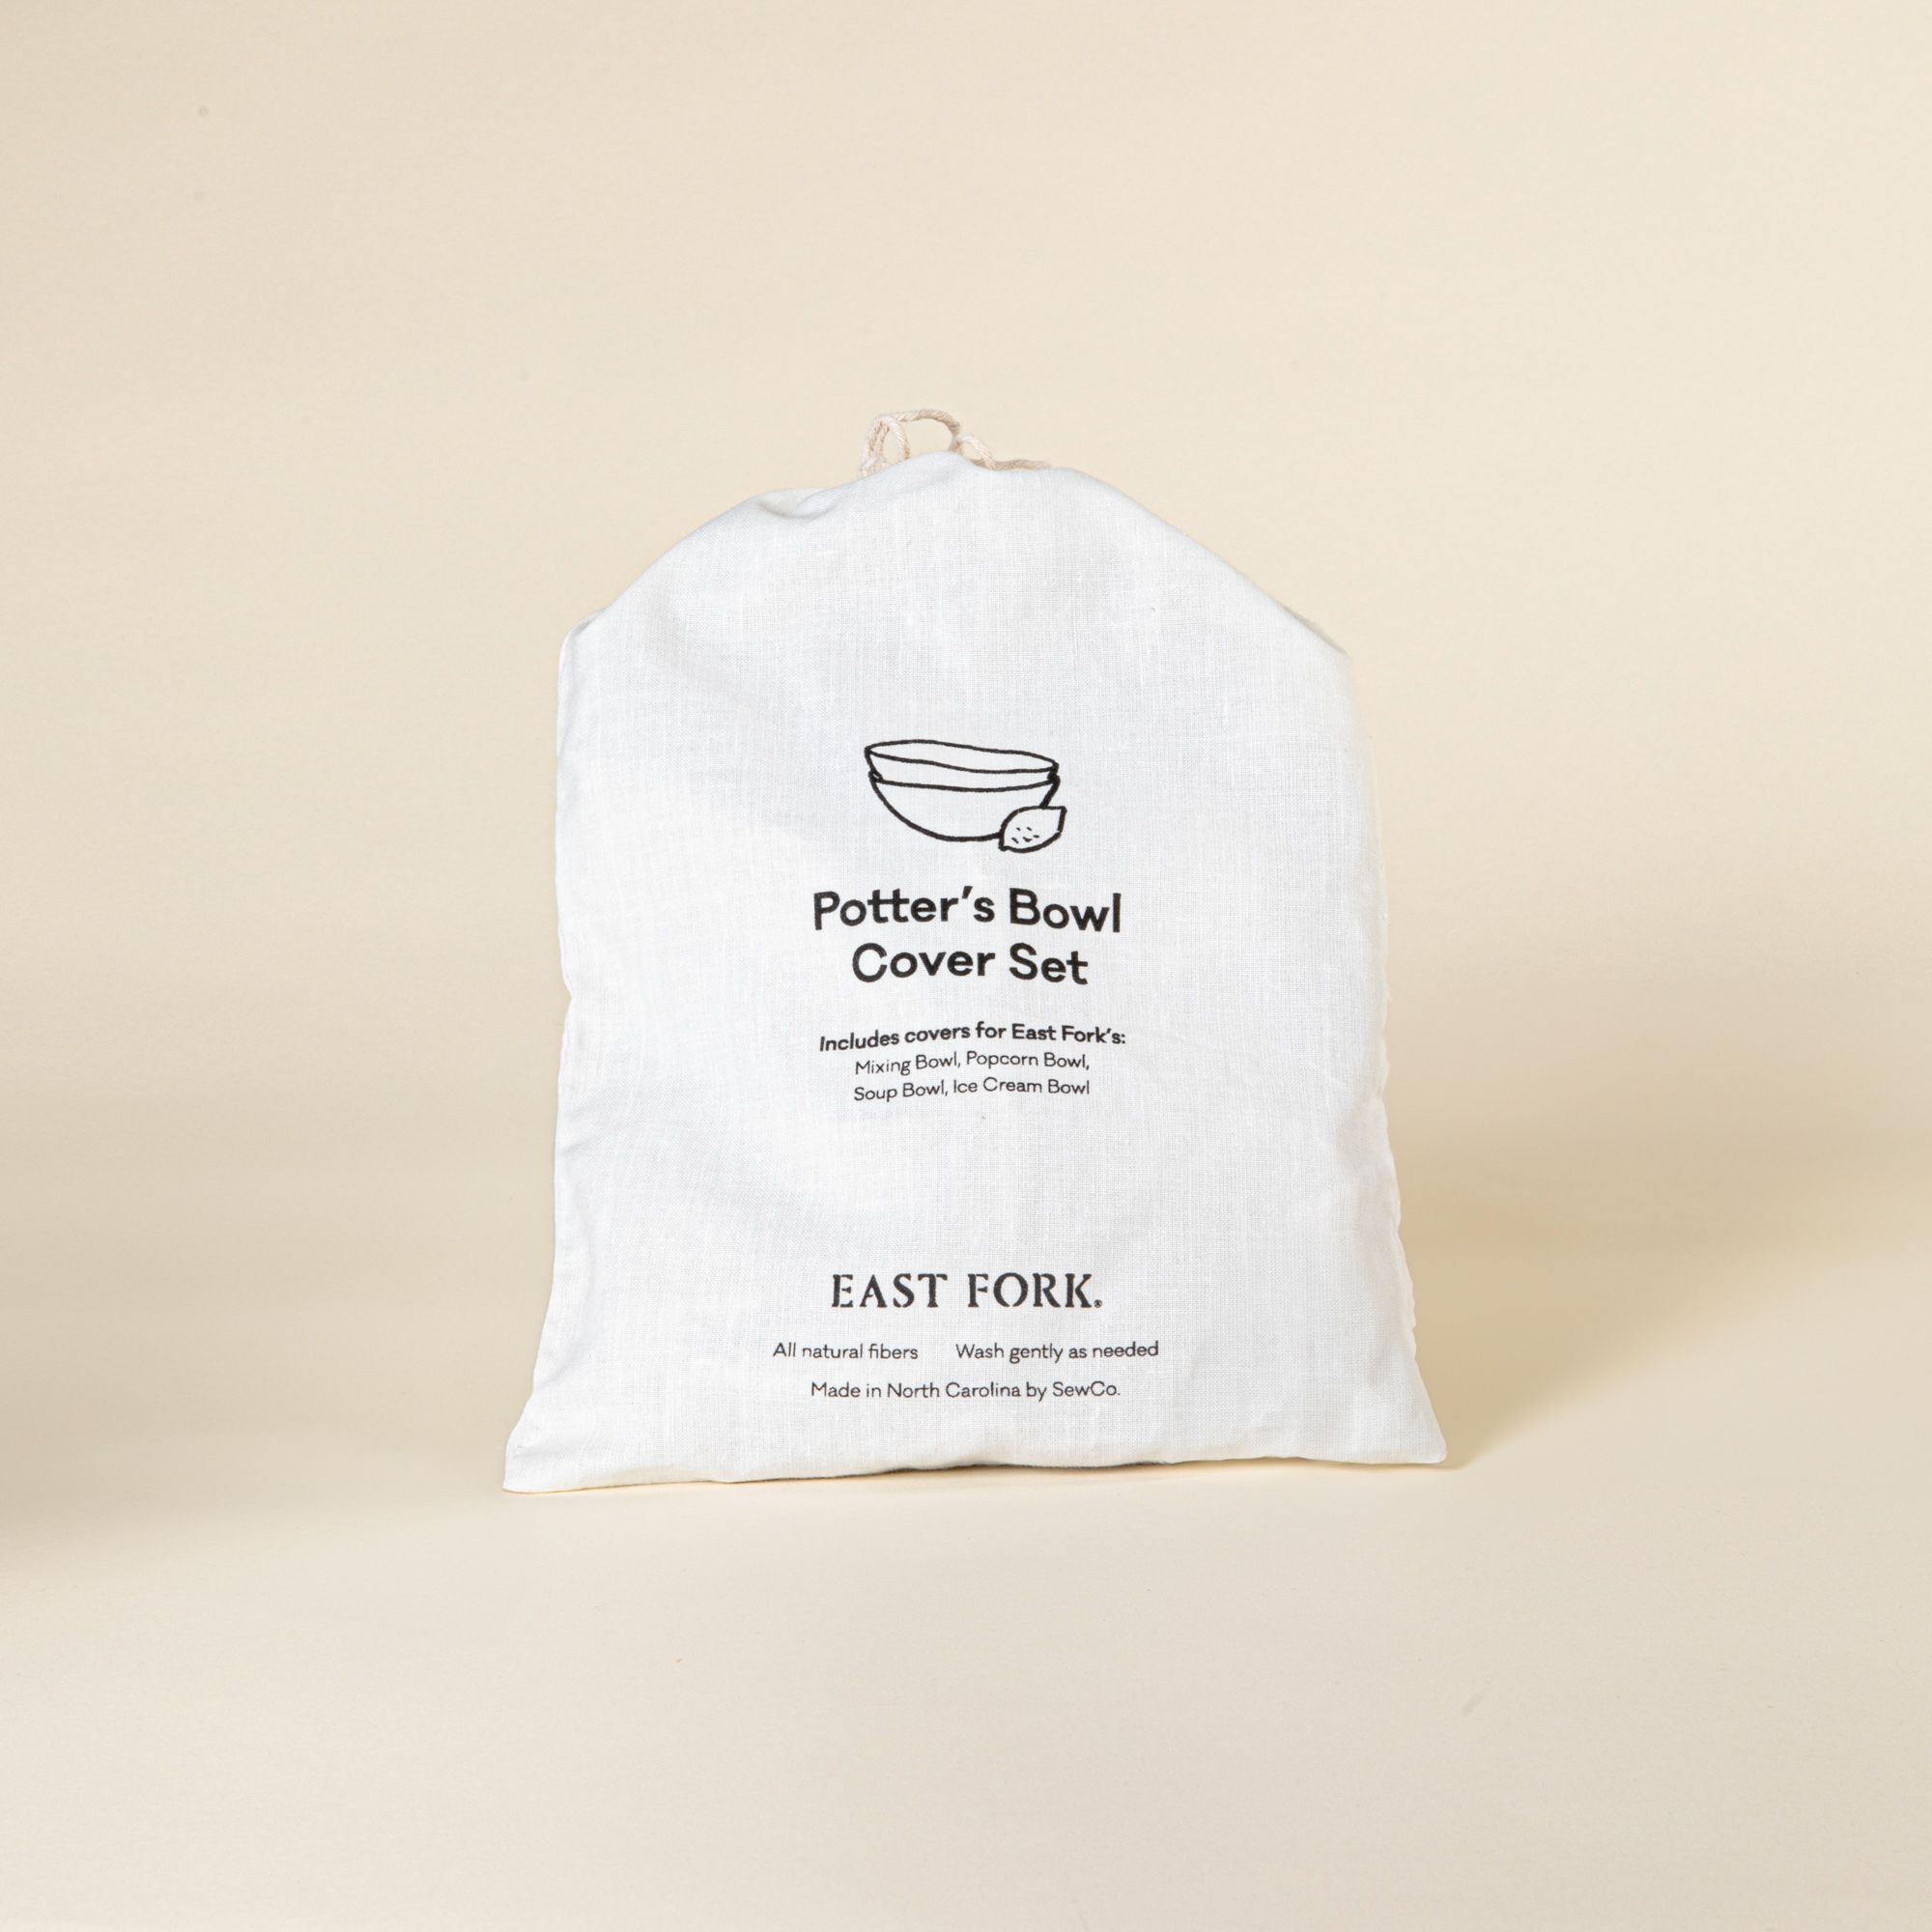 White linen drawstring bag that says Potter's Bowl Cover Set with product details